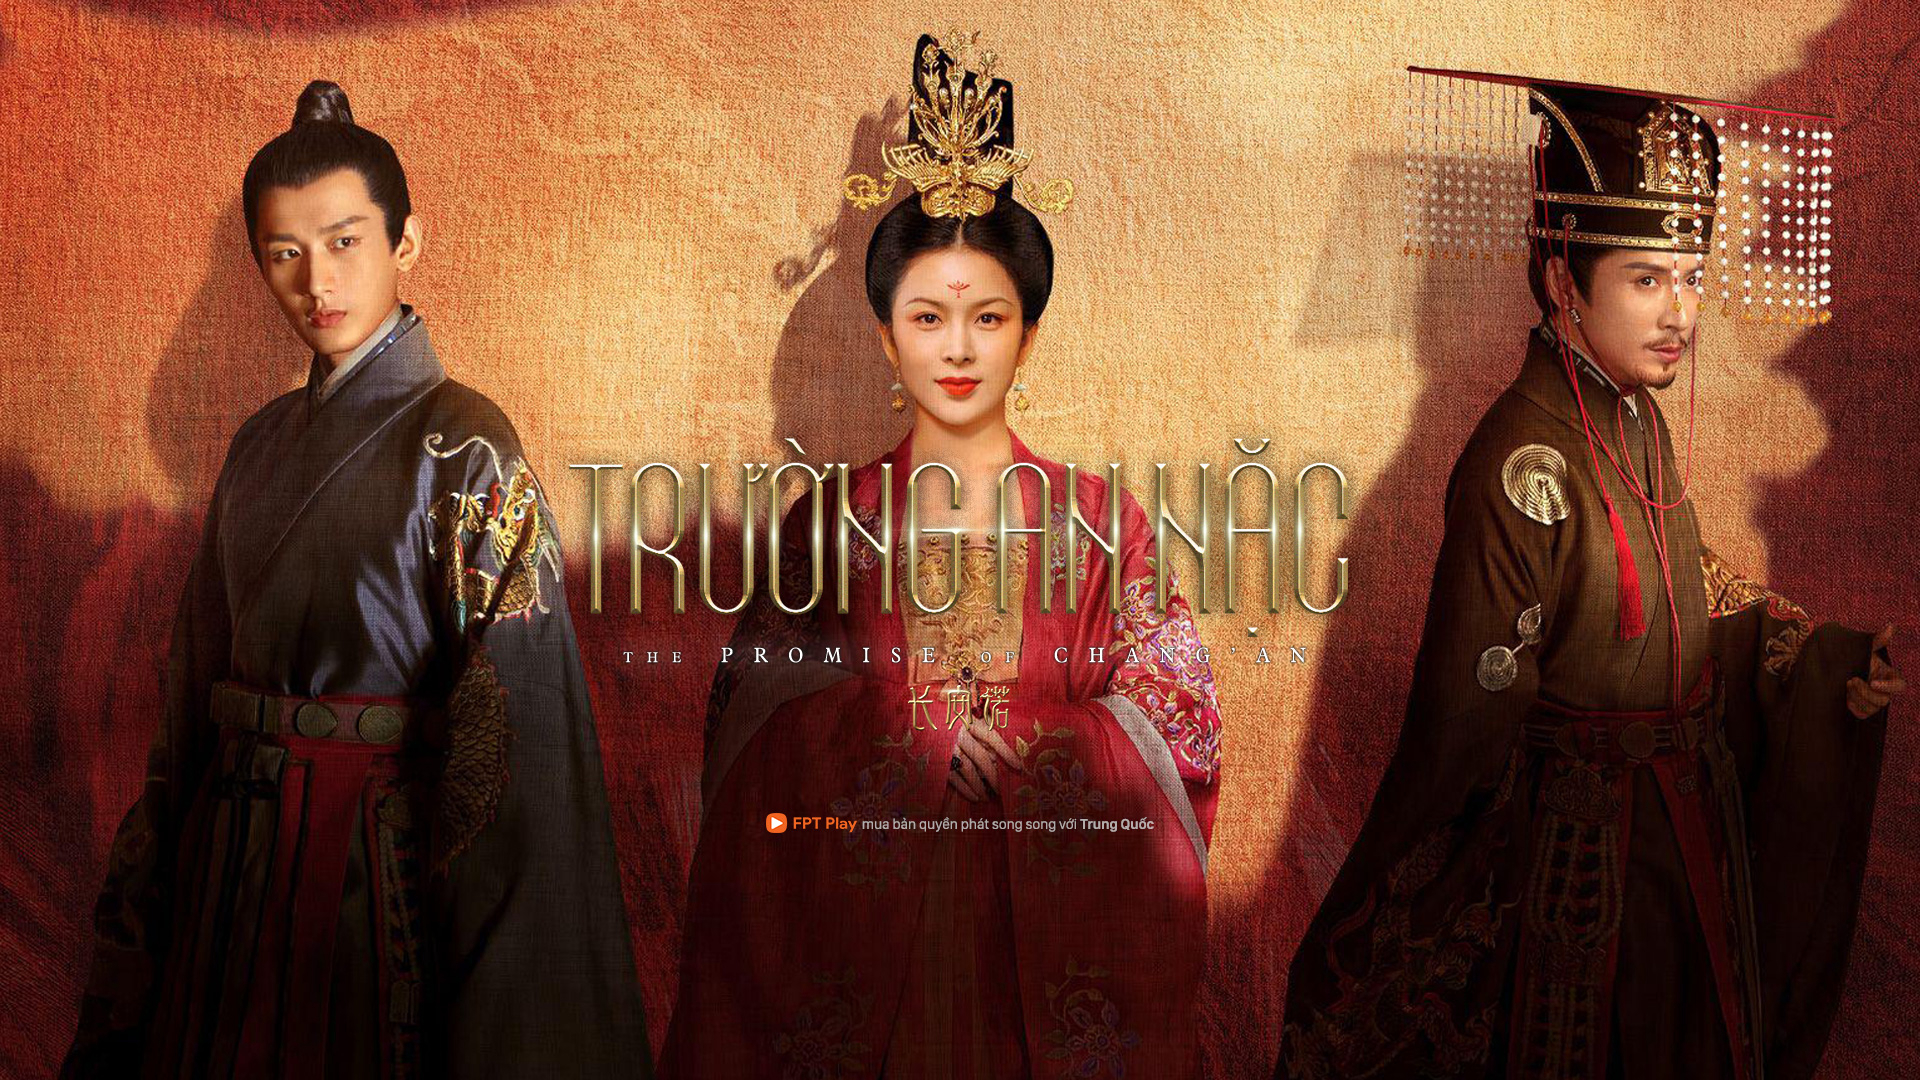 Trường An Nặc -  The Promise of Chang’an (2020)